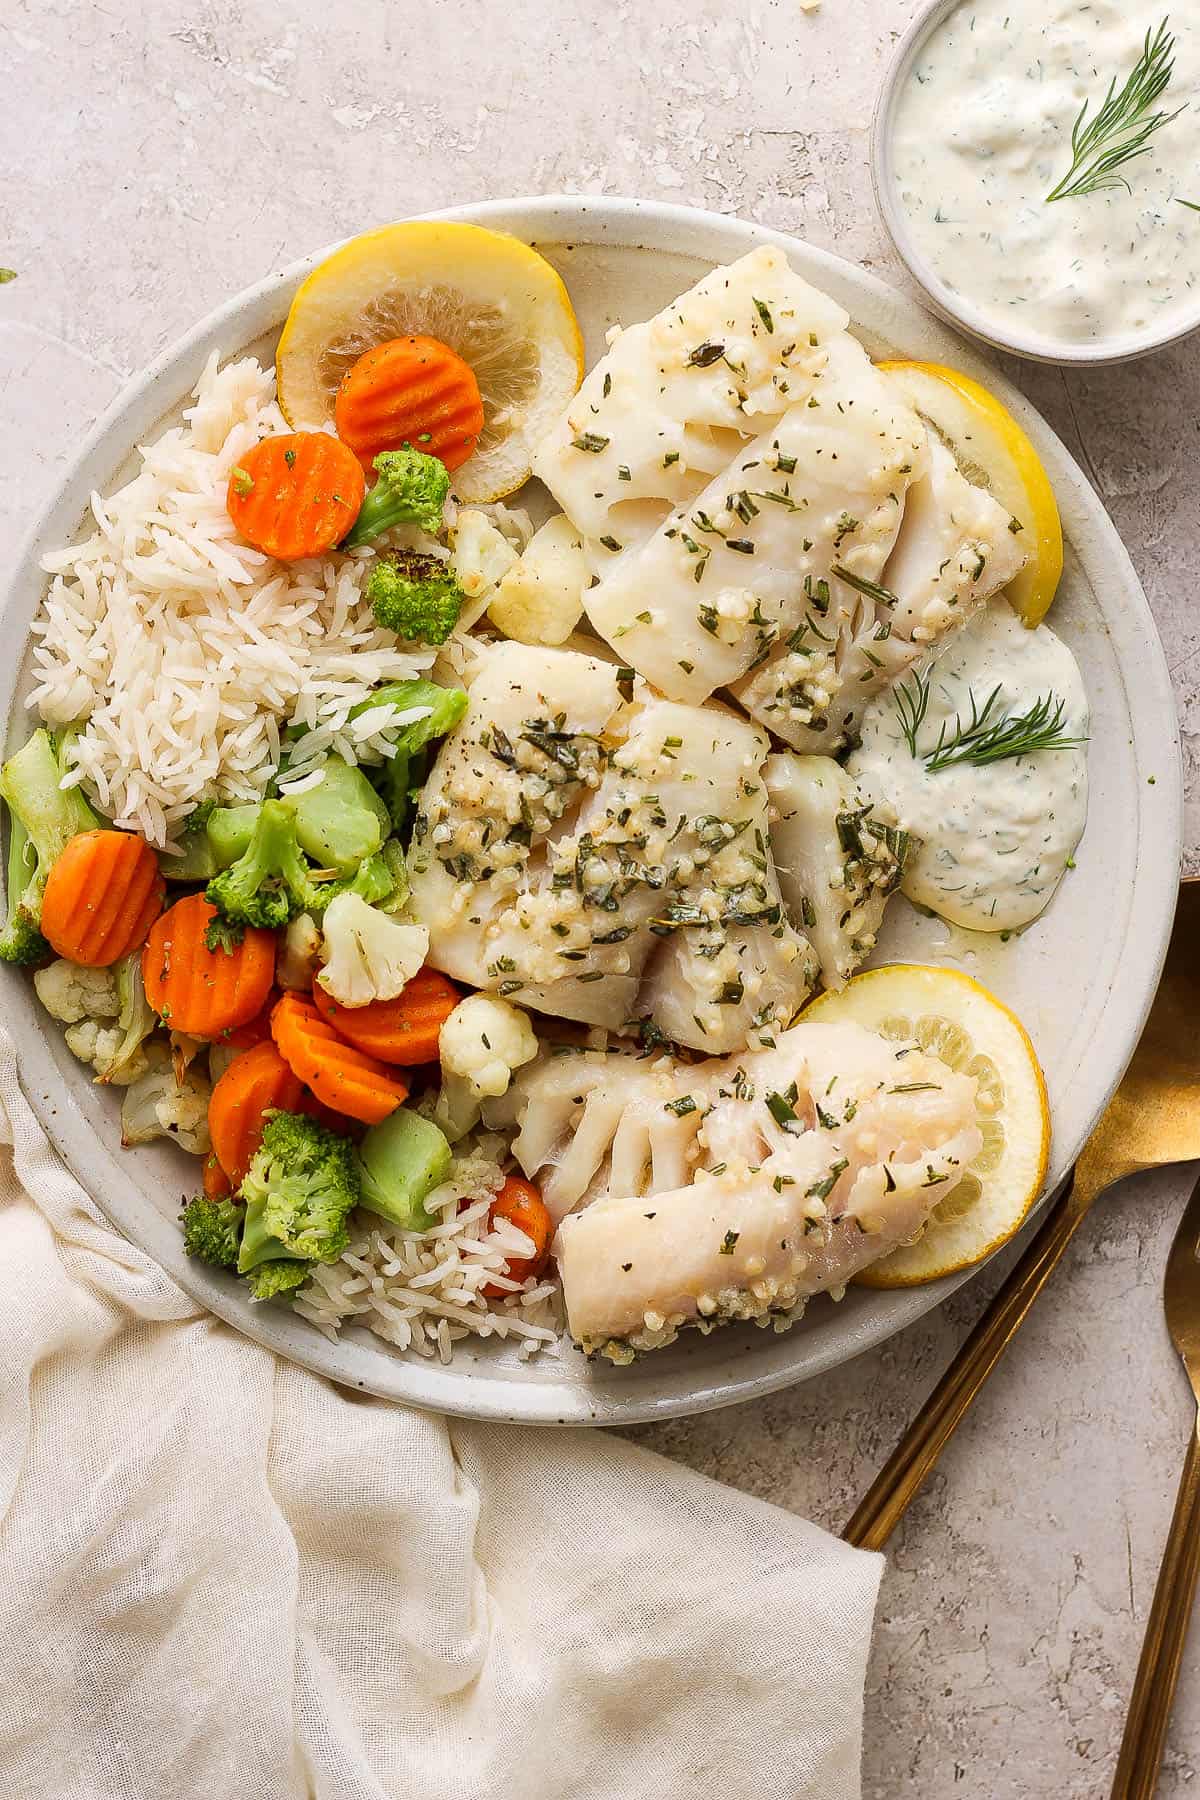 A dinner plate made up of baked cod, lemon slices, mixed veggies, rice, and tartar sauce.